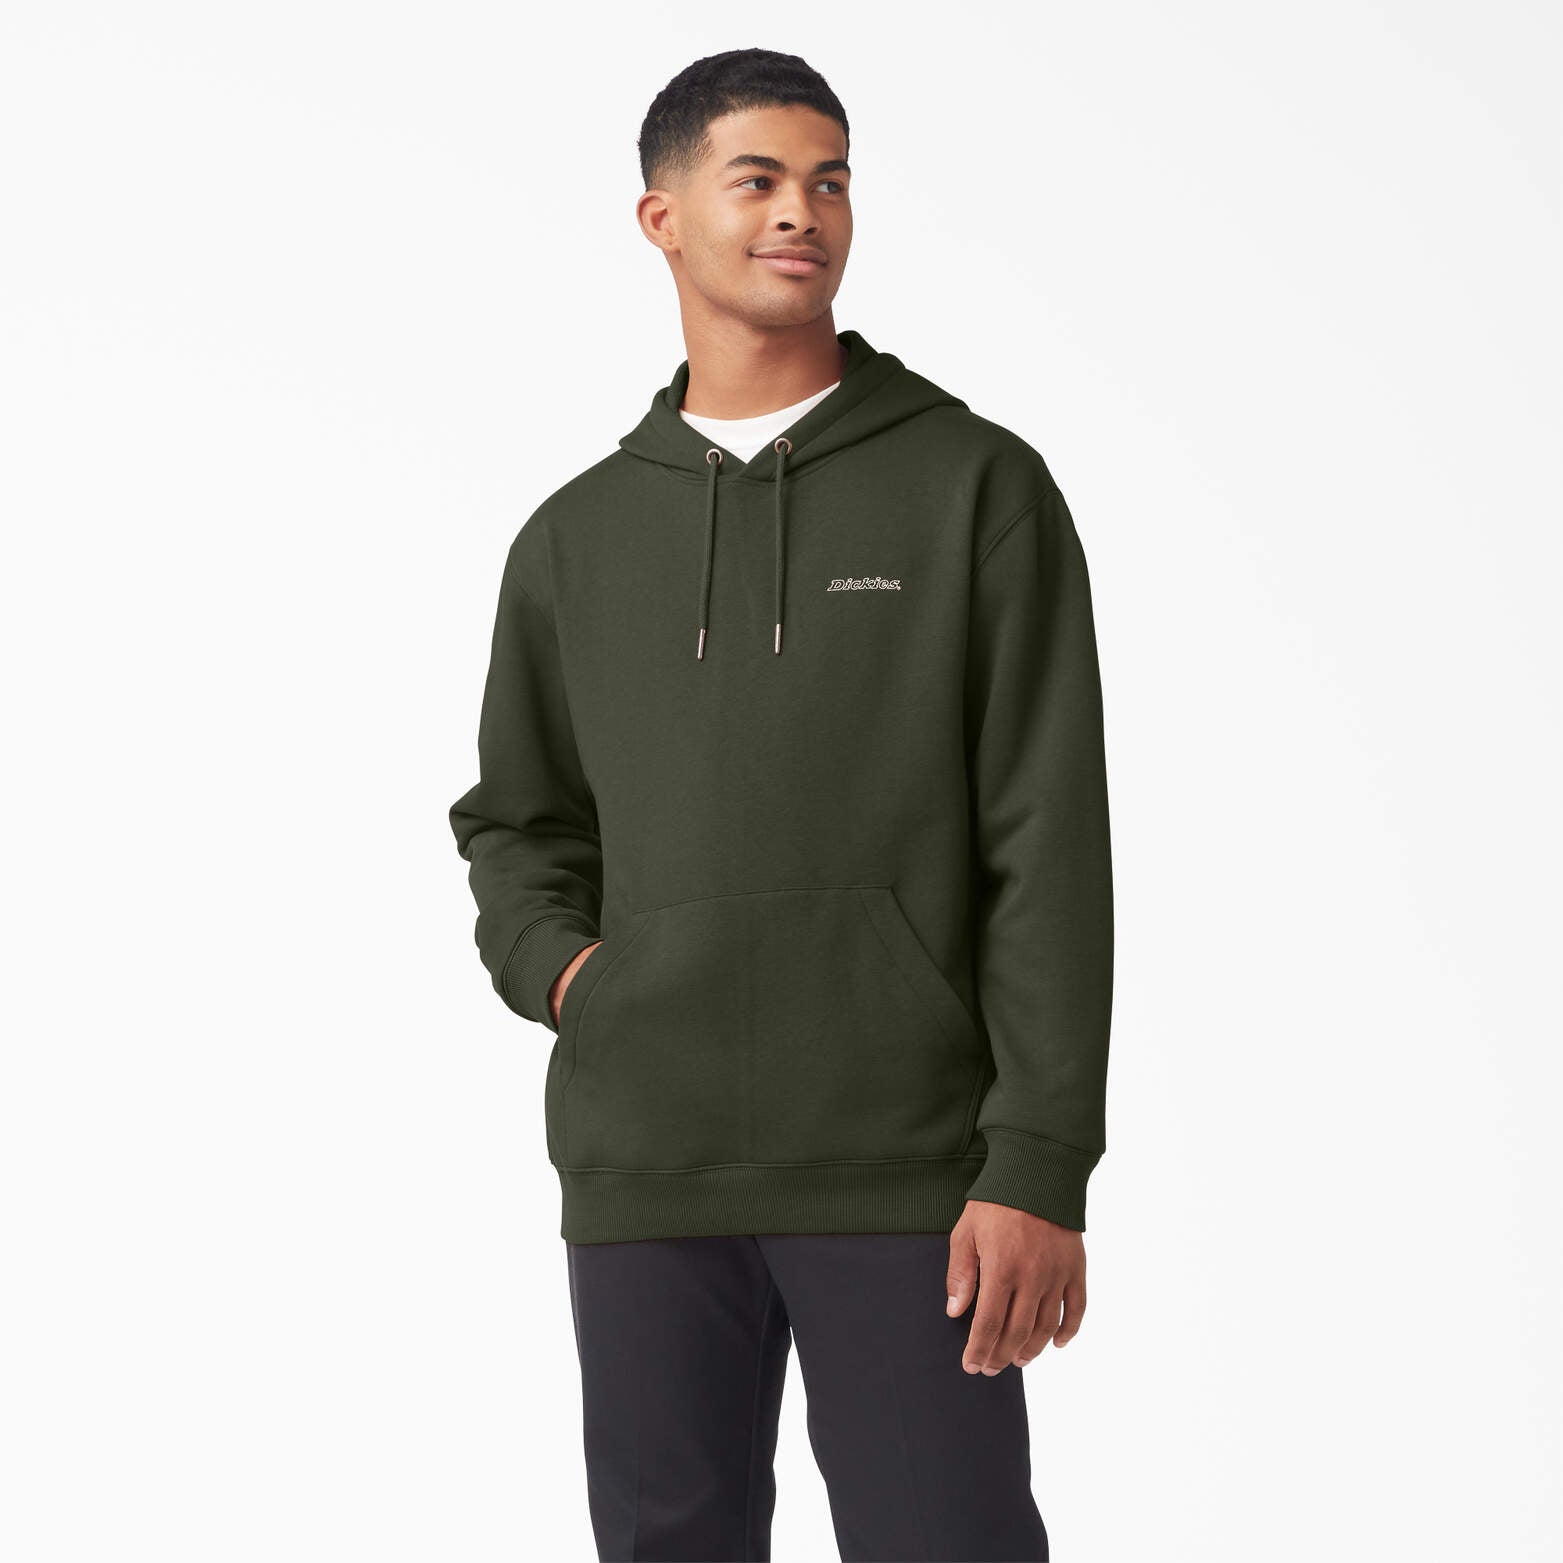 Dickies Men's Uniontown Hoodie (Olive) $22.10 + Free Shipping